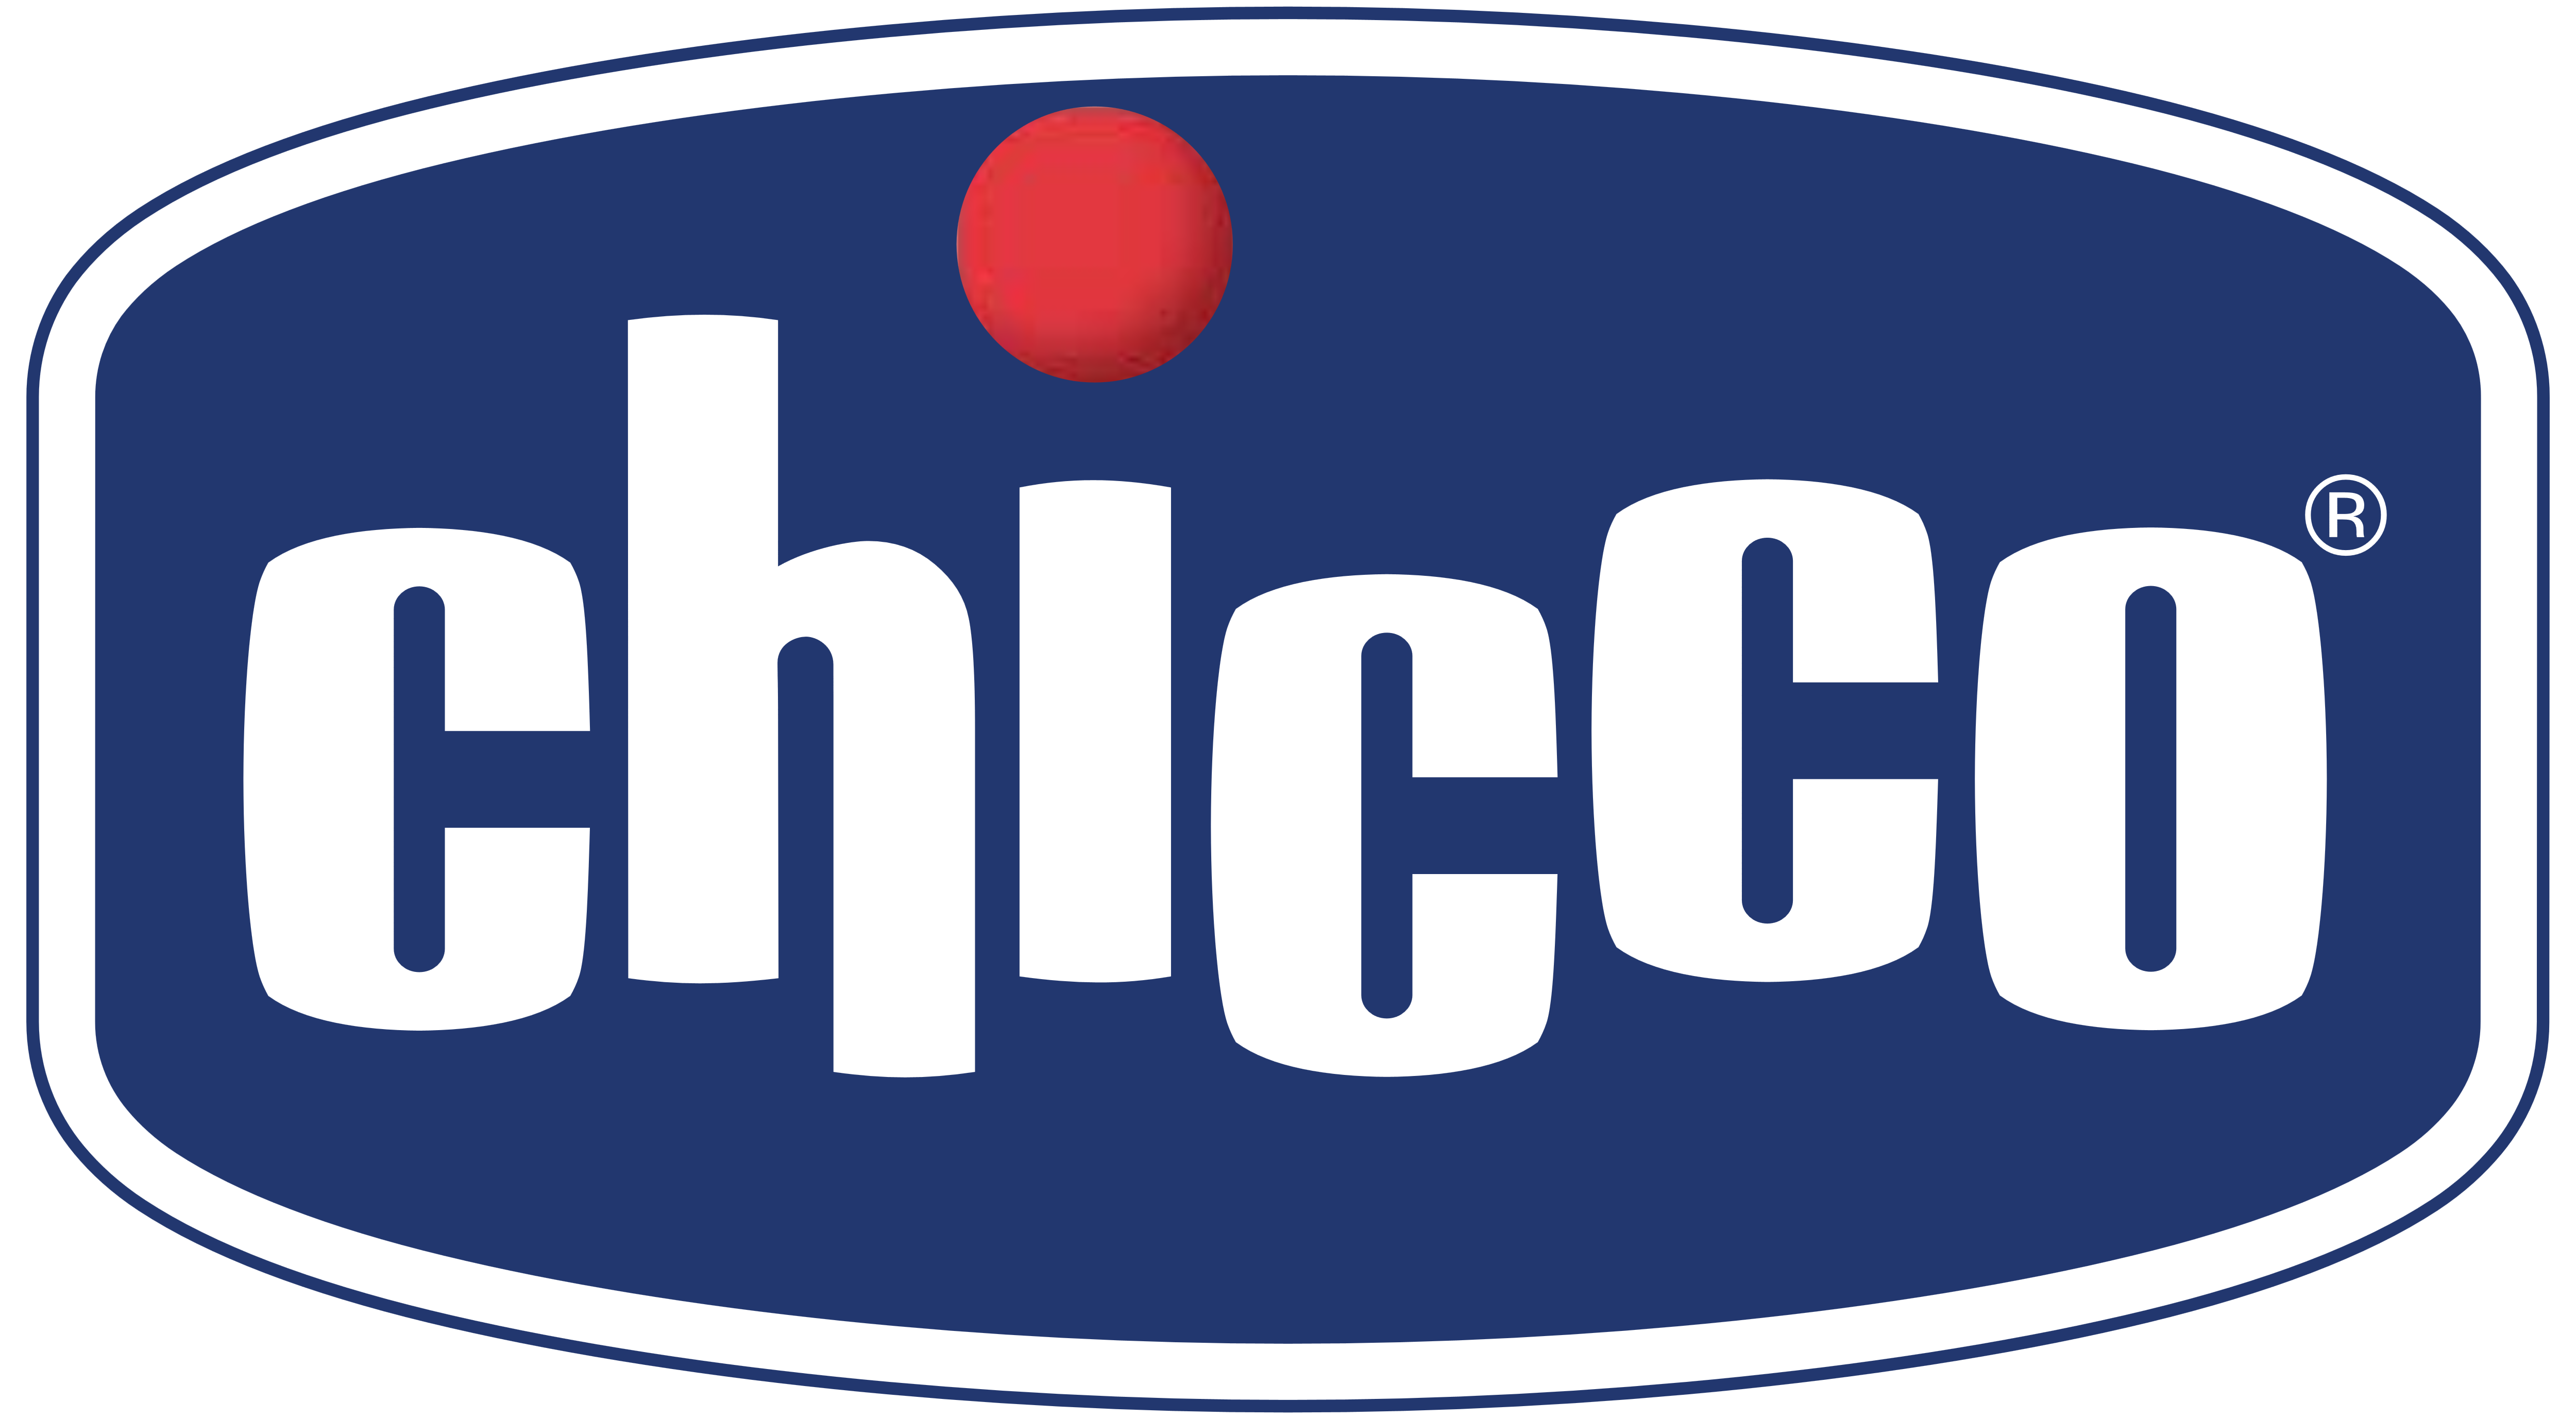 Chicco Logos  Download 